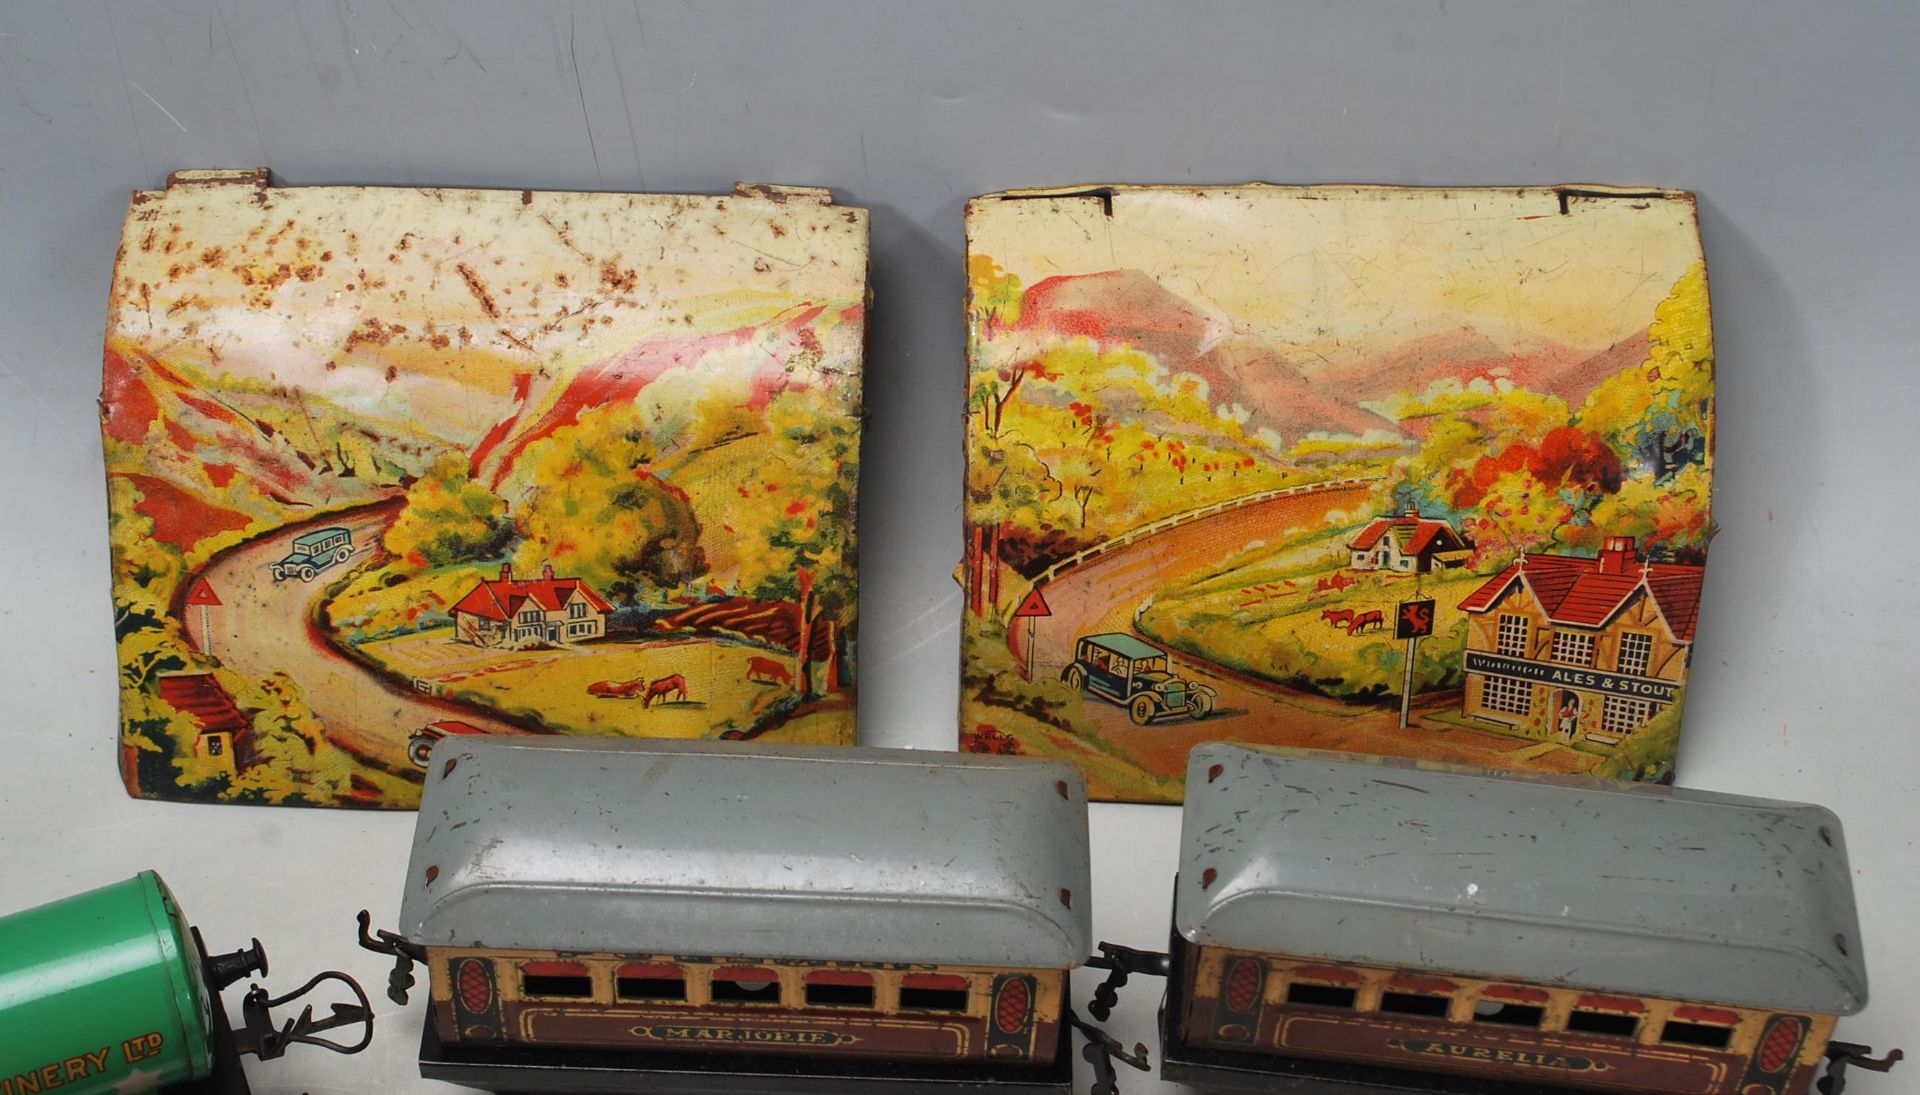 COLLECTION OF LATE 20TH CENTURY 0 GUAGE TINPLATE CLOCKWORK LOCOMOTIVE TRAINS - Image 3 of 6